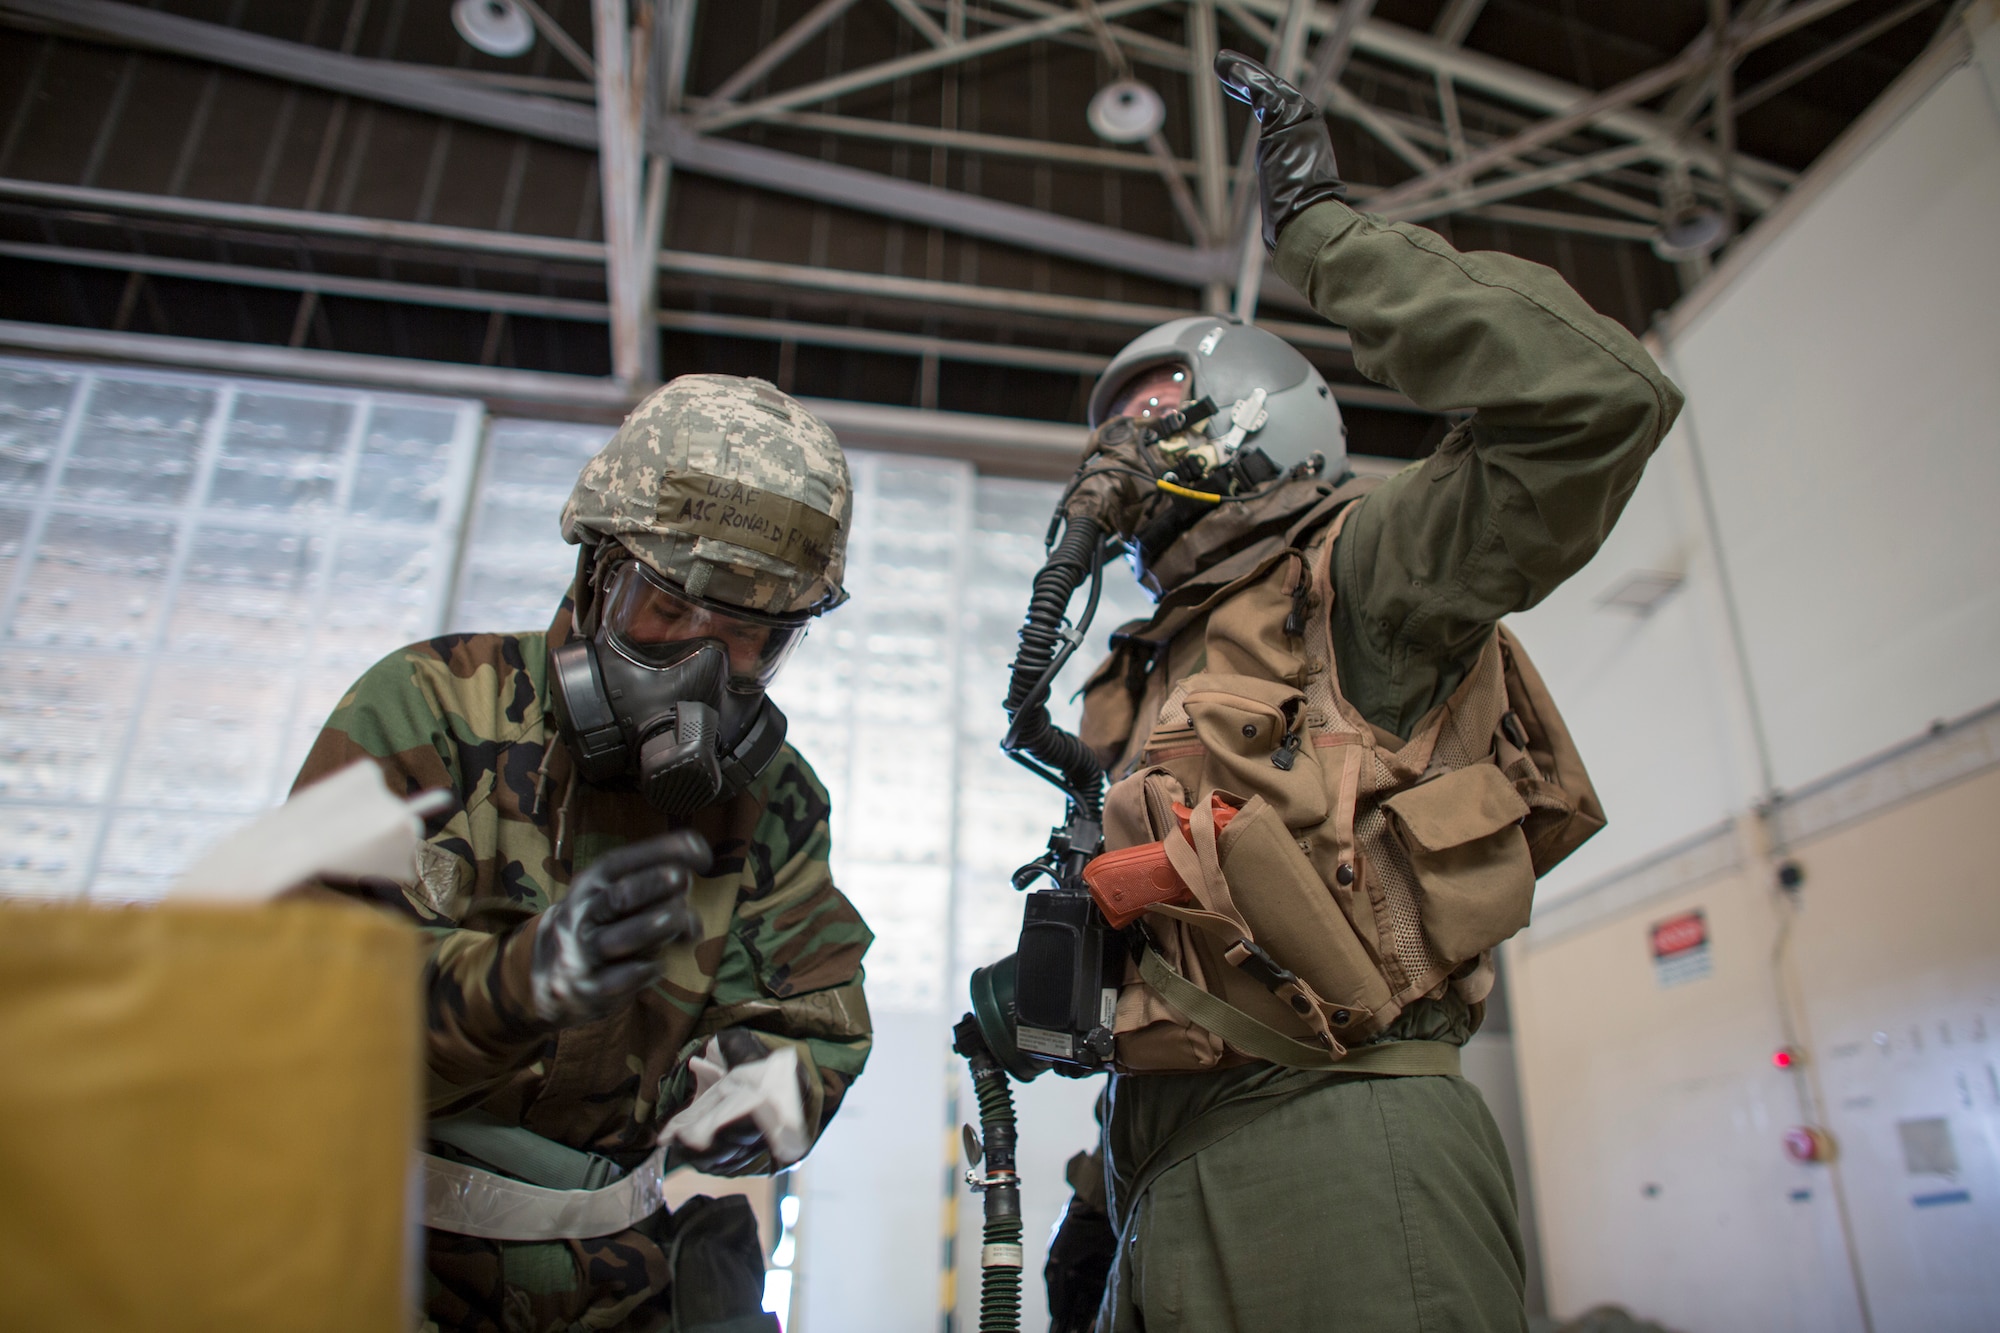 Airman 1st Class Ronald Flanagan, 374th Operations Support Squadron aircrew flight equipment, wipes his hands after checking simulated contaminated equipment at Yokota Air Base, Japan, May 20, 2015, during a Samurai Readiness Inspection. Airmen from the 36th Airlift Squadron and 374th OSS performed aircrew decontamination procedures with the Lightweight Inflatable Decontamination System (LIDS). The LIDS takes about 20 minutes to set up and consists of four stations for rinsing off excess chemicals and a process to dispose of contaminated clothing and aircrew equipment. (U.S. Air Force photo by Osakabe Yasuo/Released)